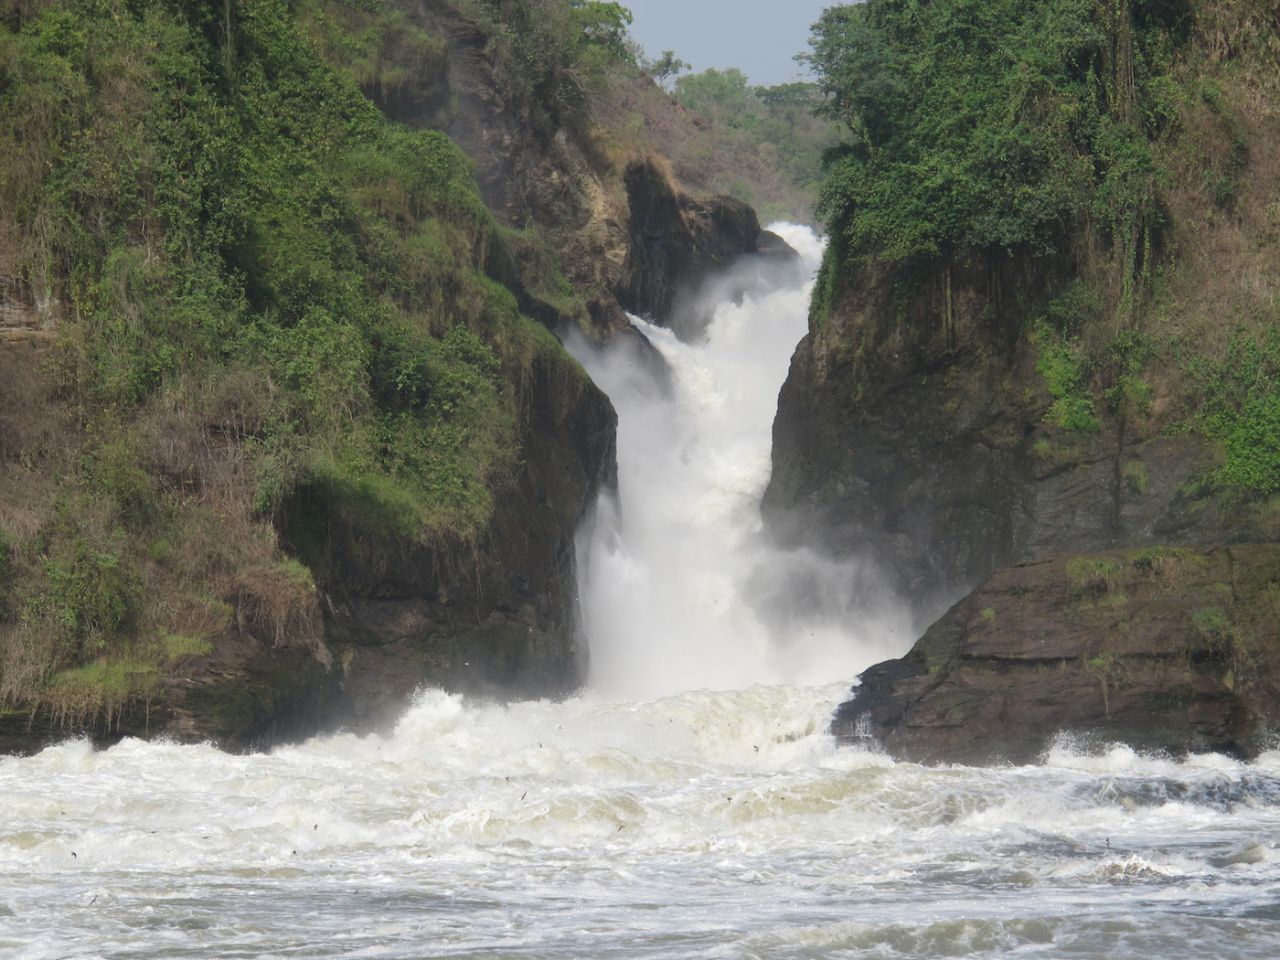 Baker's Trail passes by the beautiful Murchison Falls.